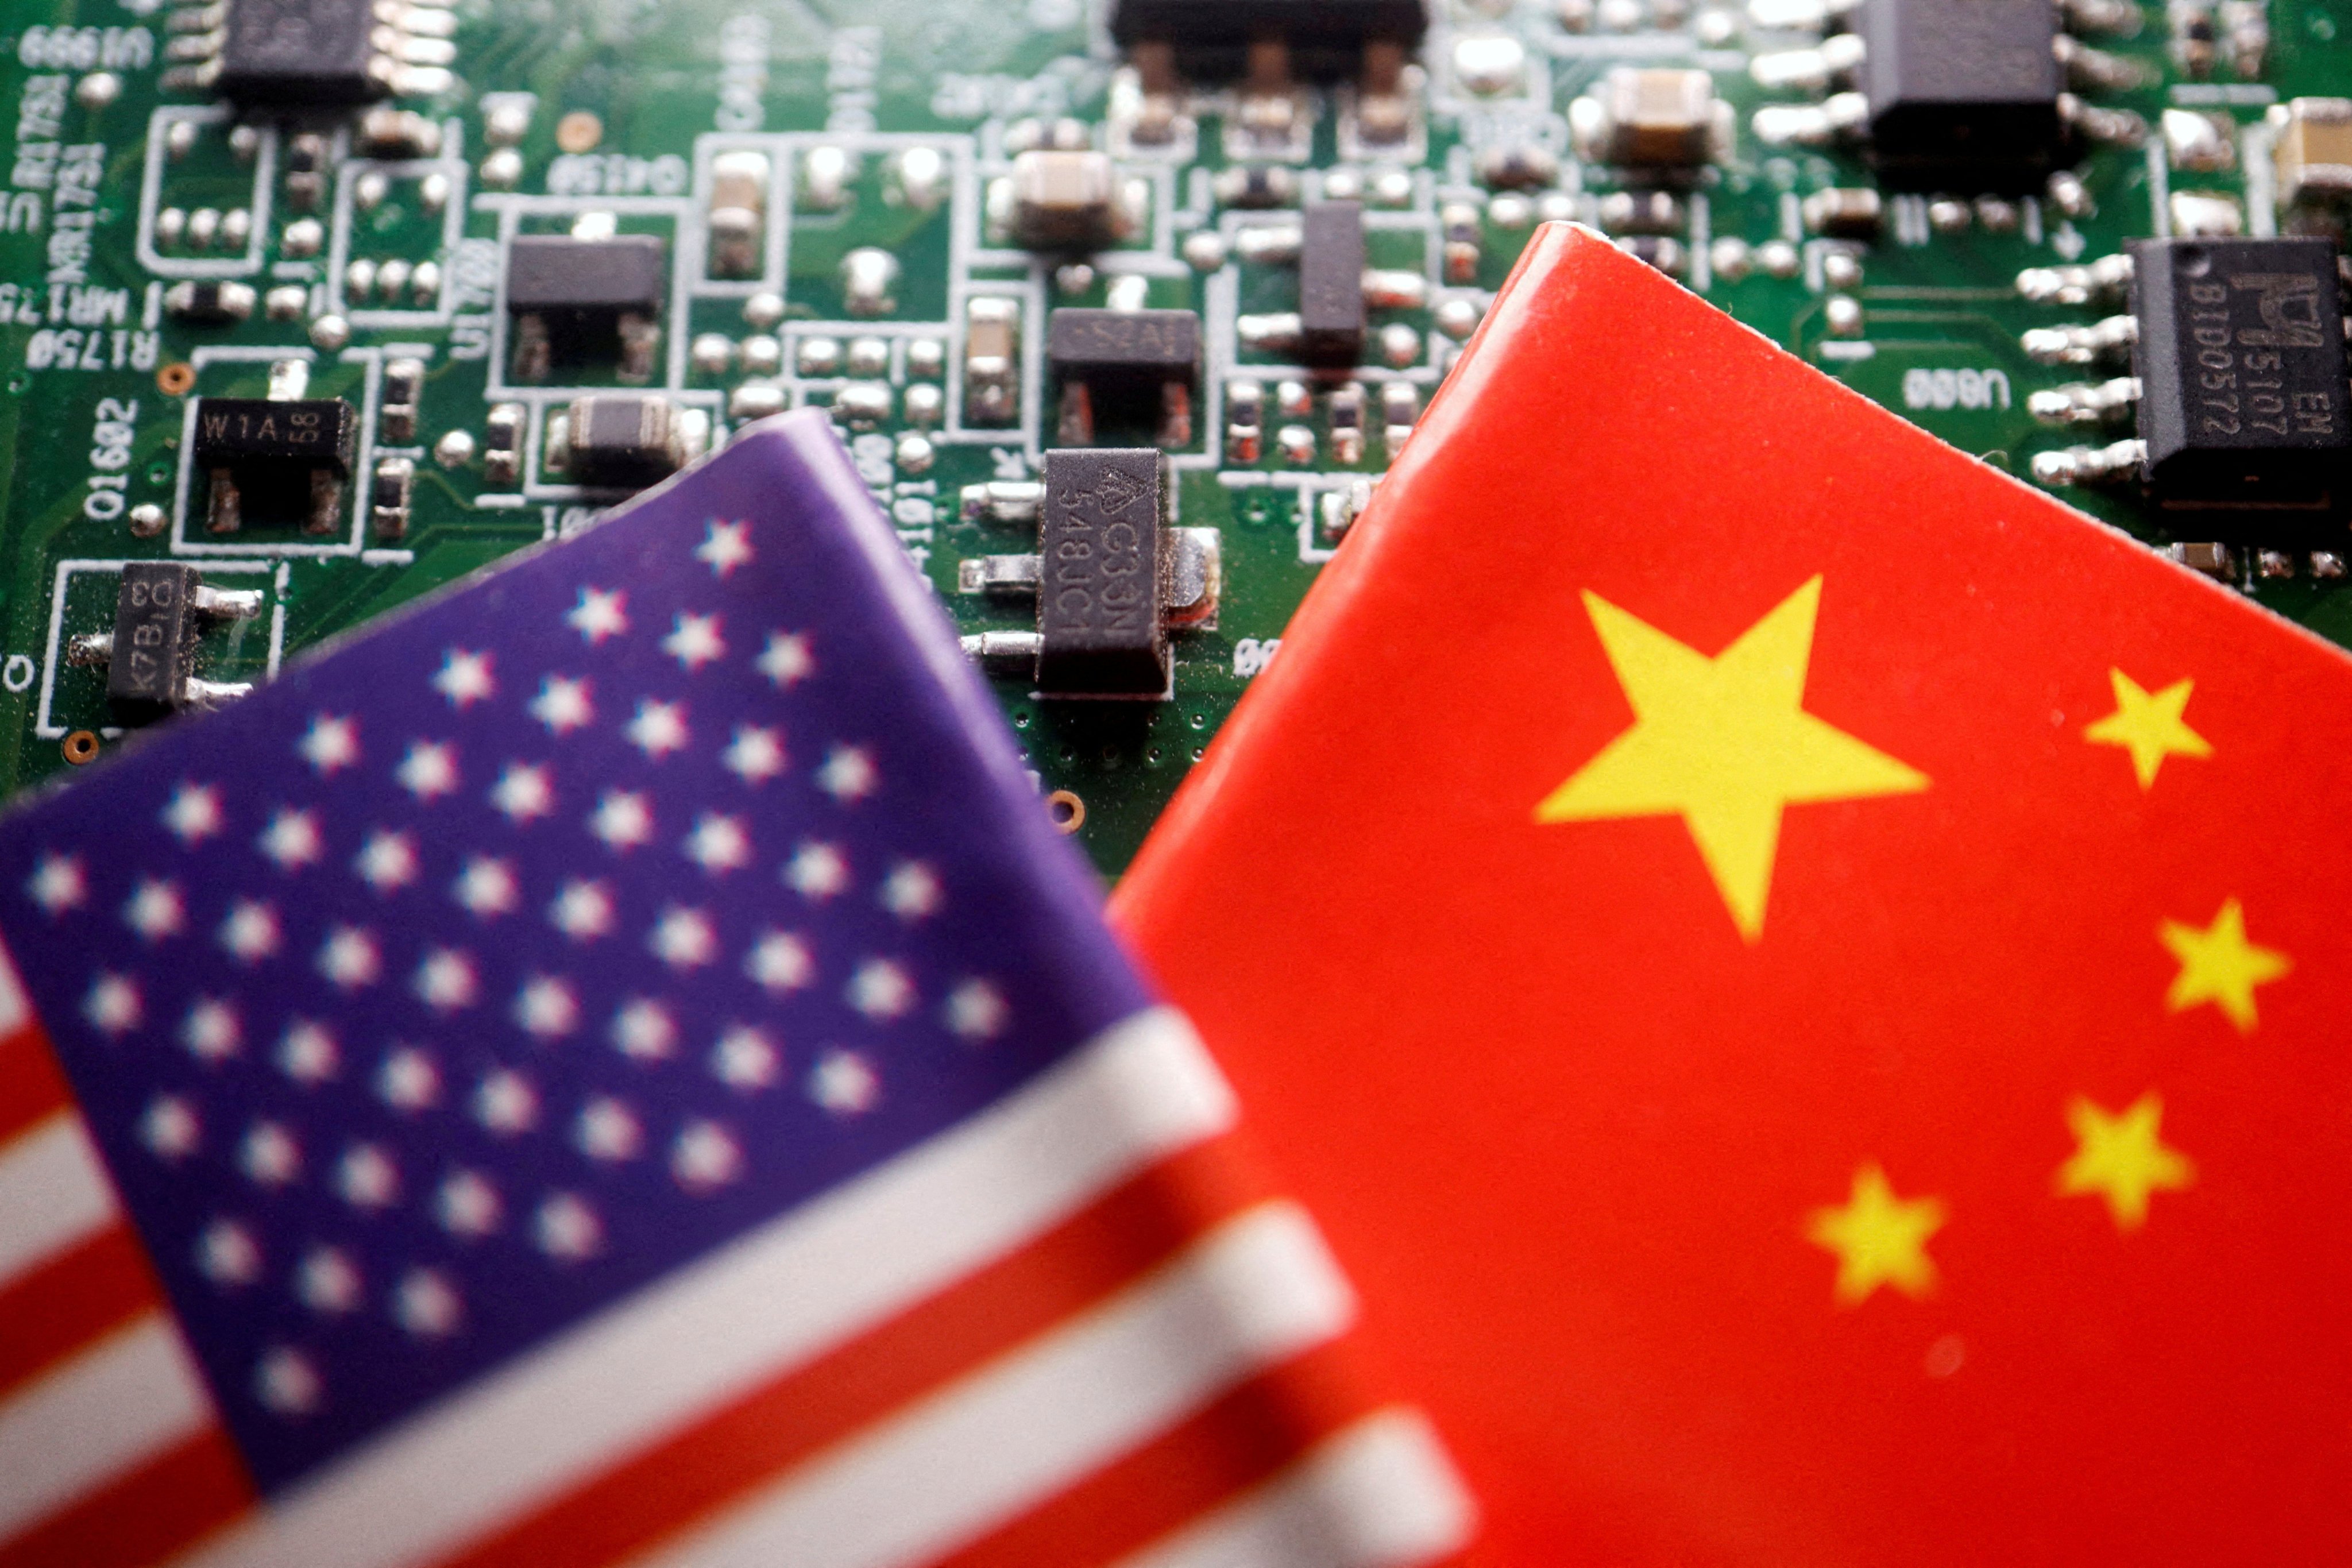 The United States and China are locked in an intense technological battle. Photo: Reuters